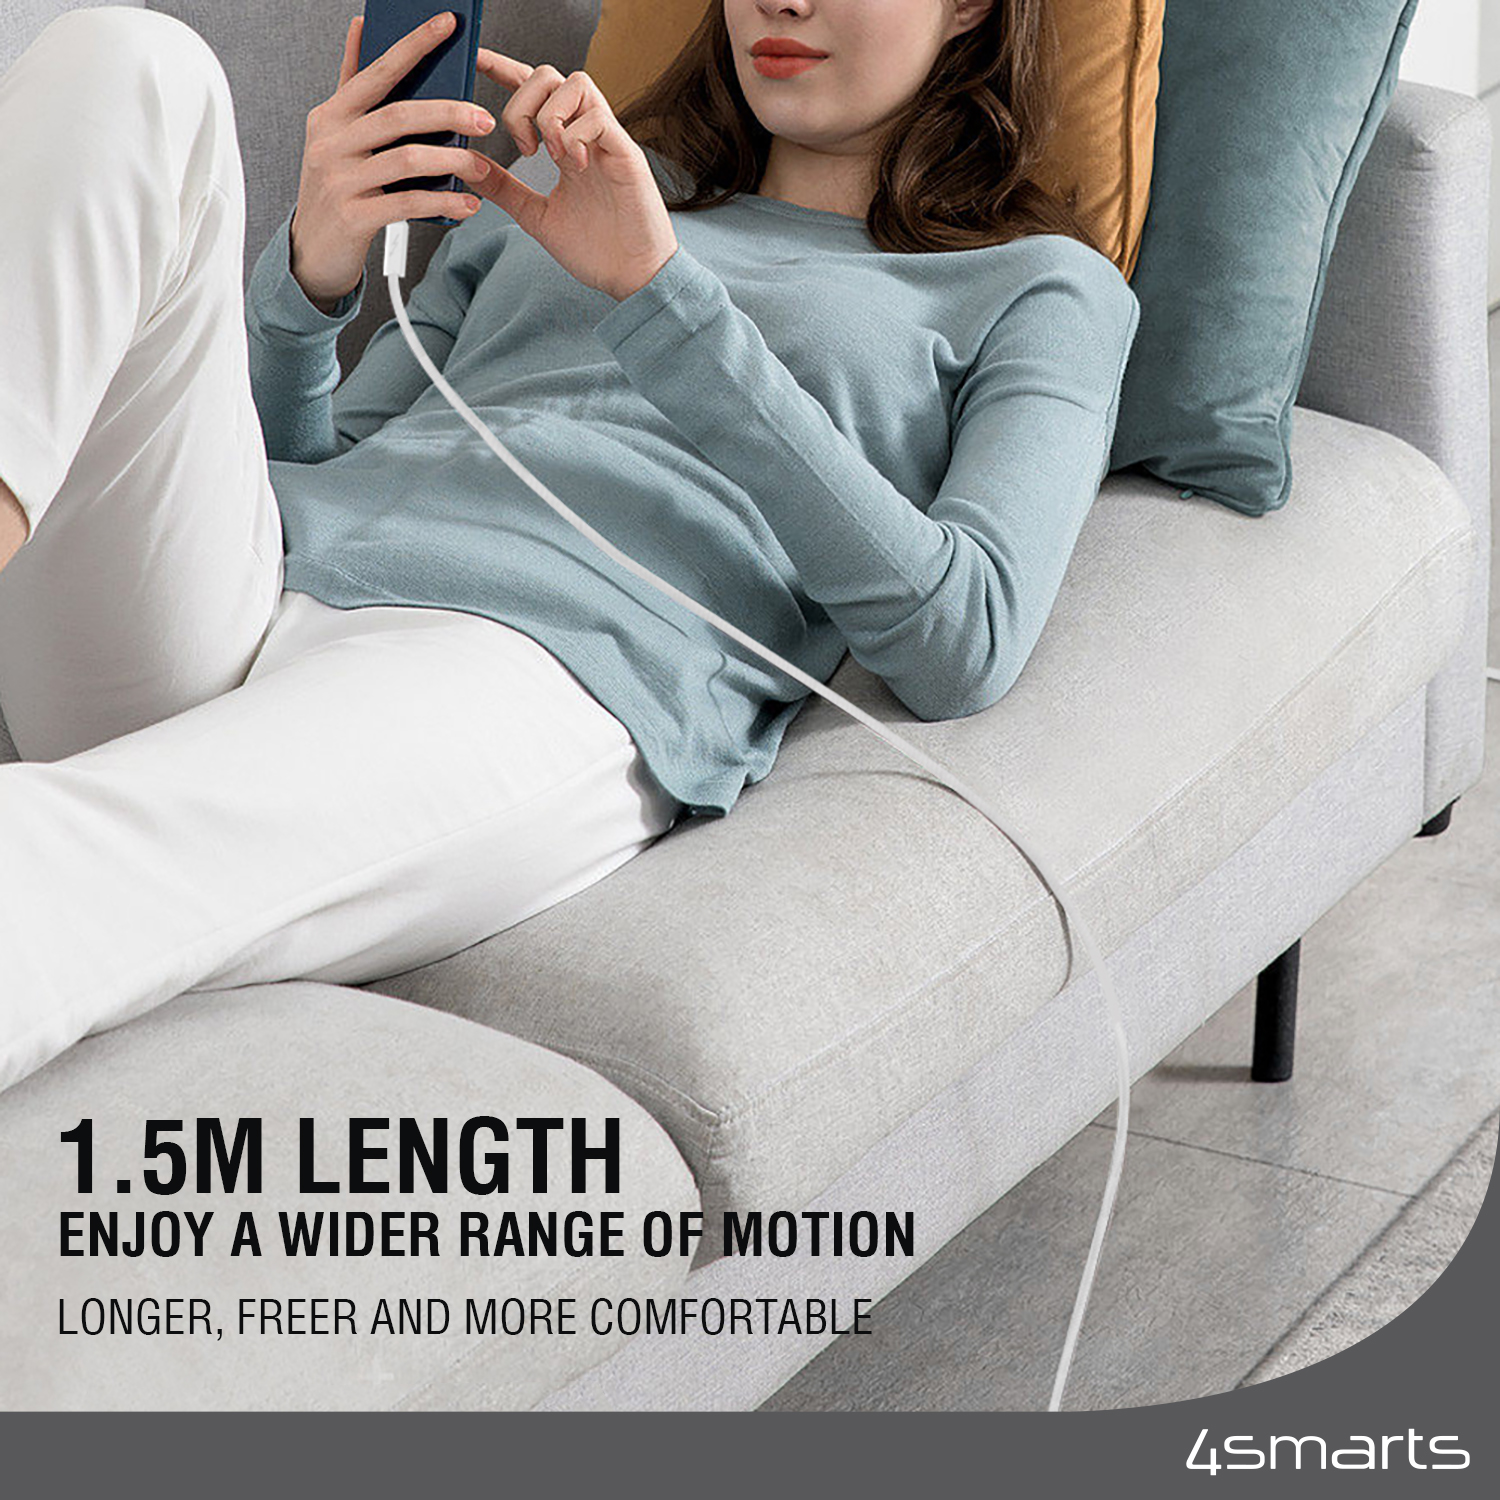 The 4smarts USB-C cable PremiumCord 240W has a length of 1.5 m and thus provides more freedom of movement.